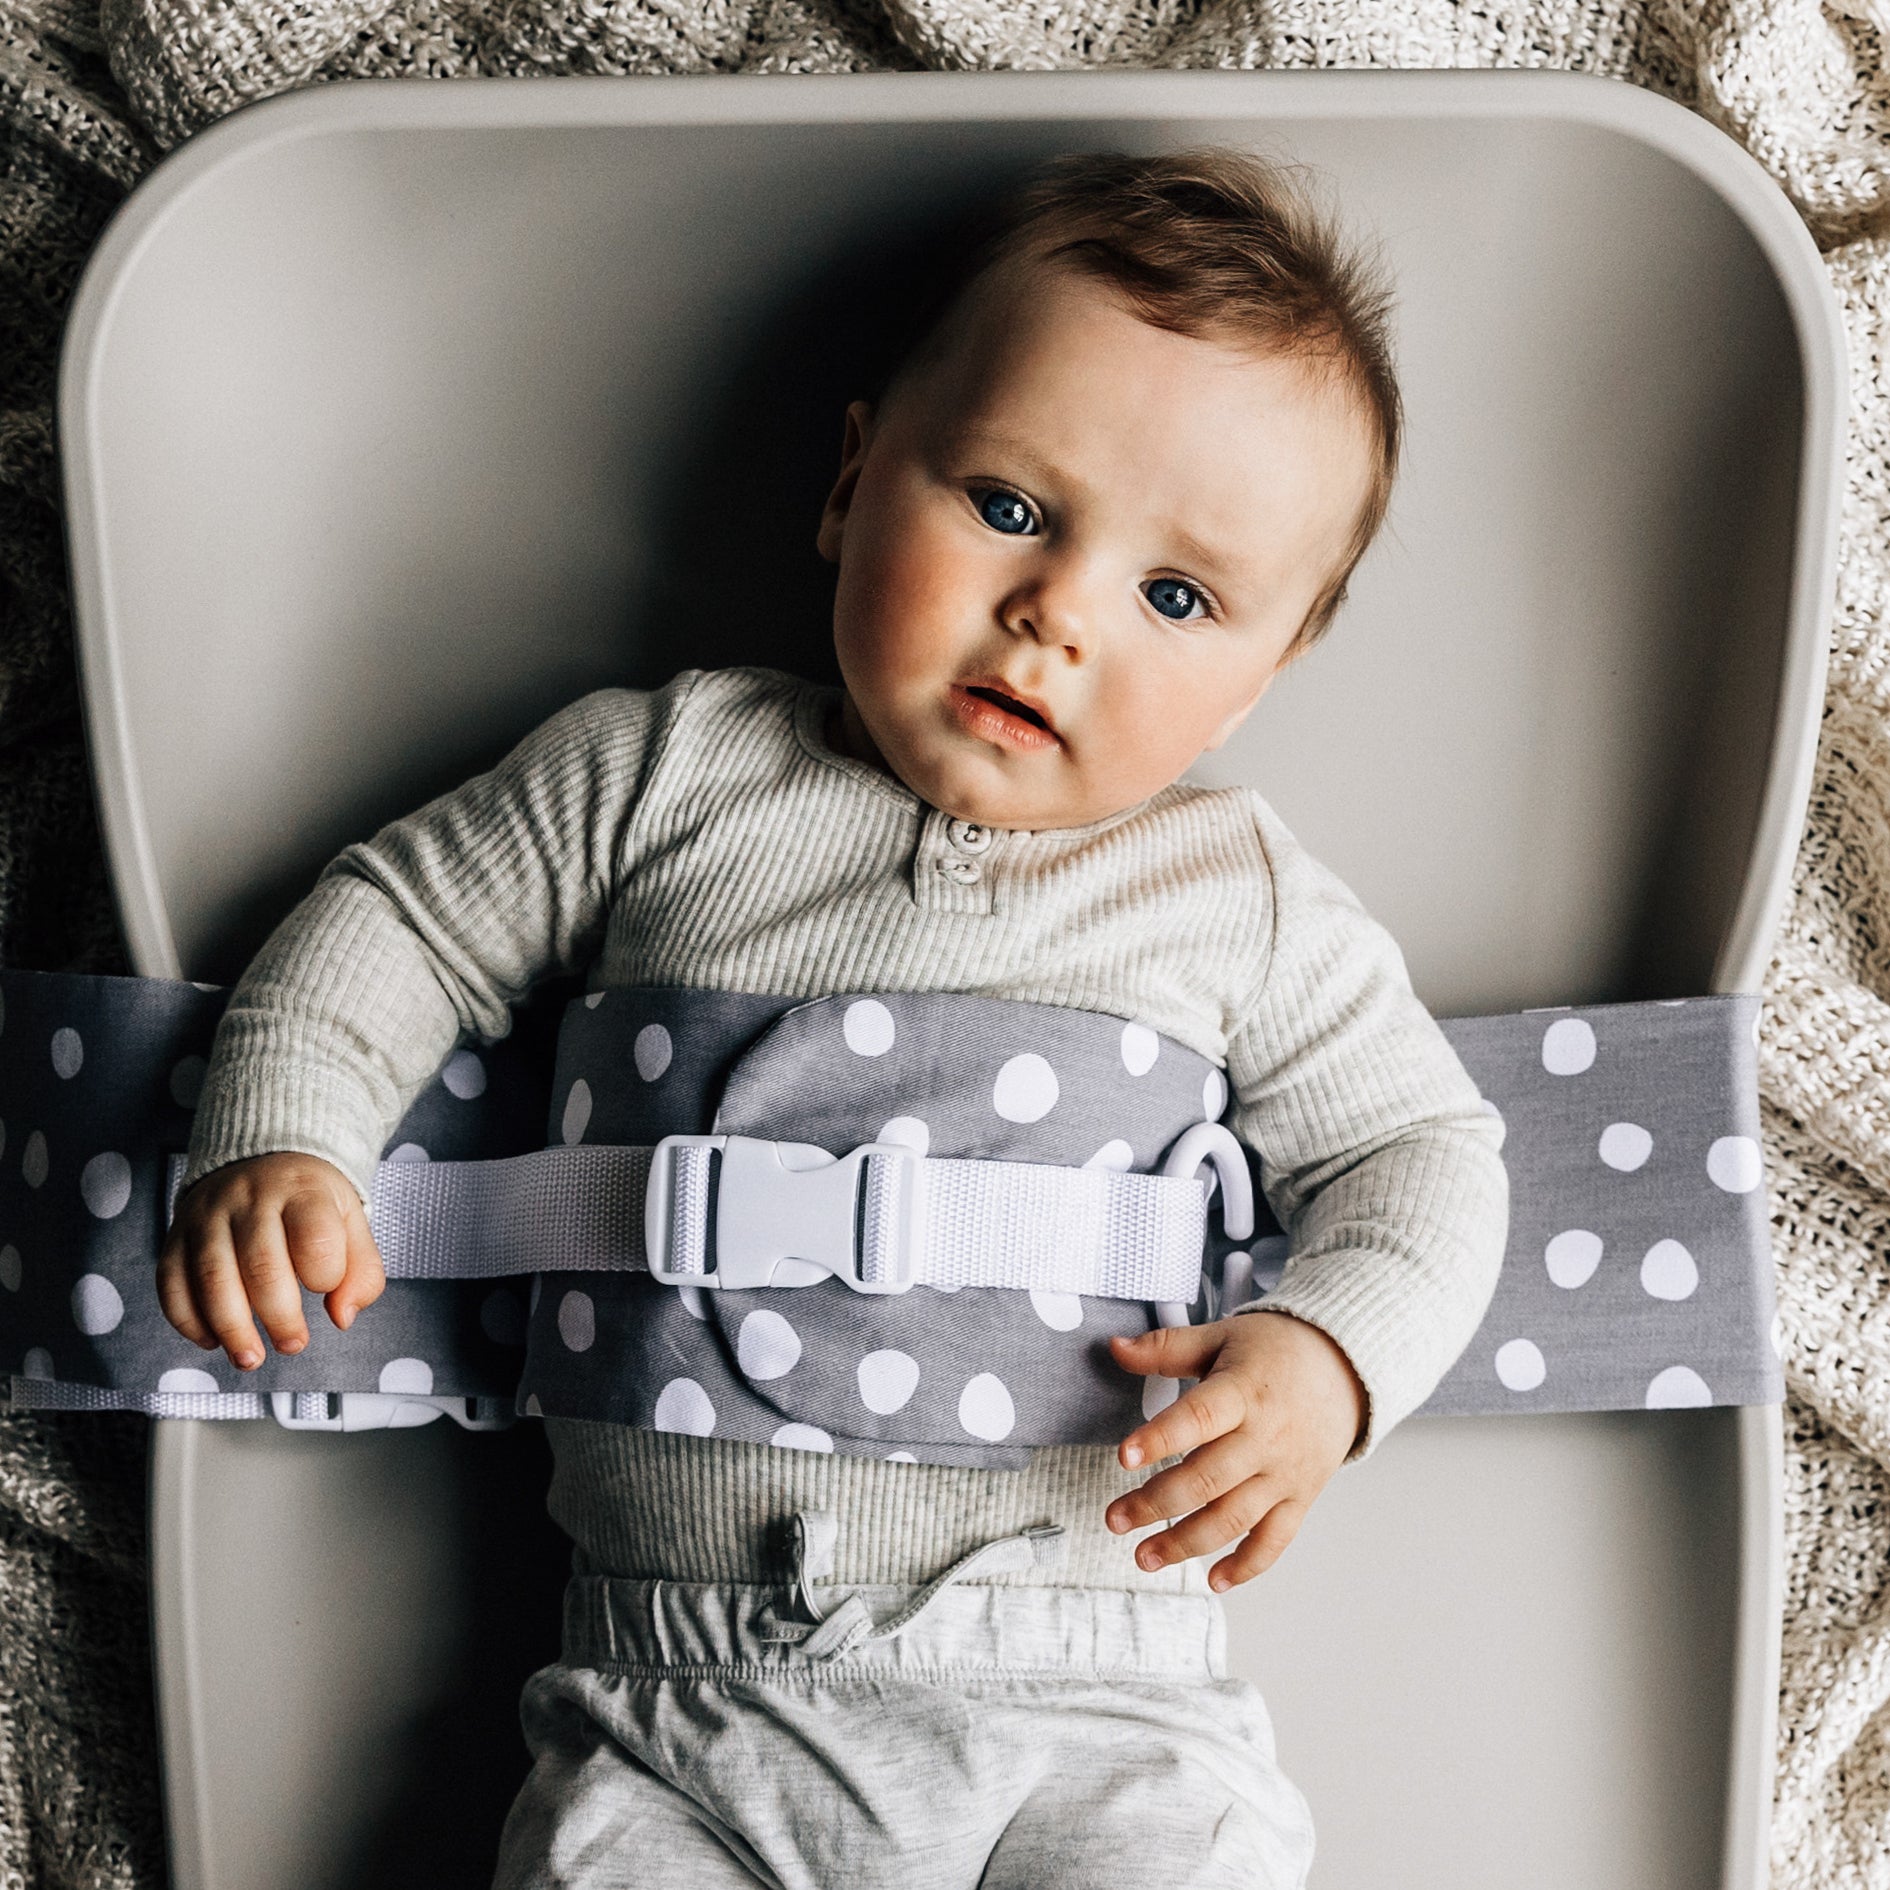 A grey WriggleBum nappy change harness is fasted around a baby on a change mat.